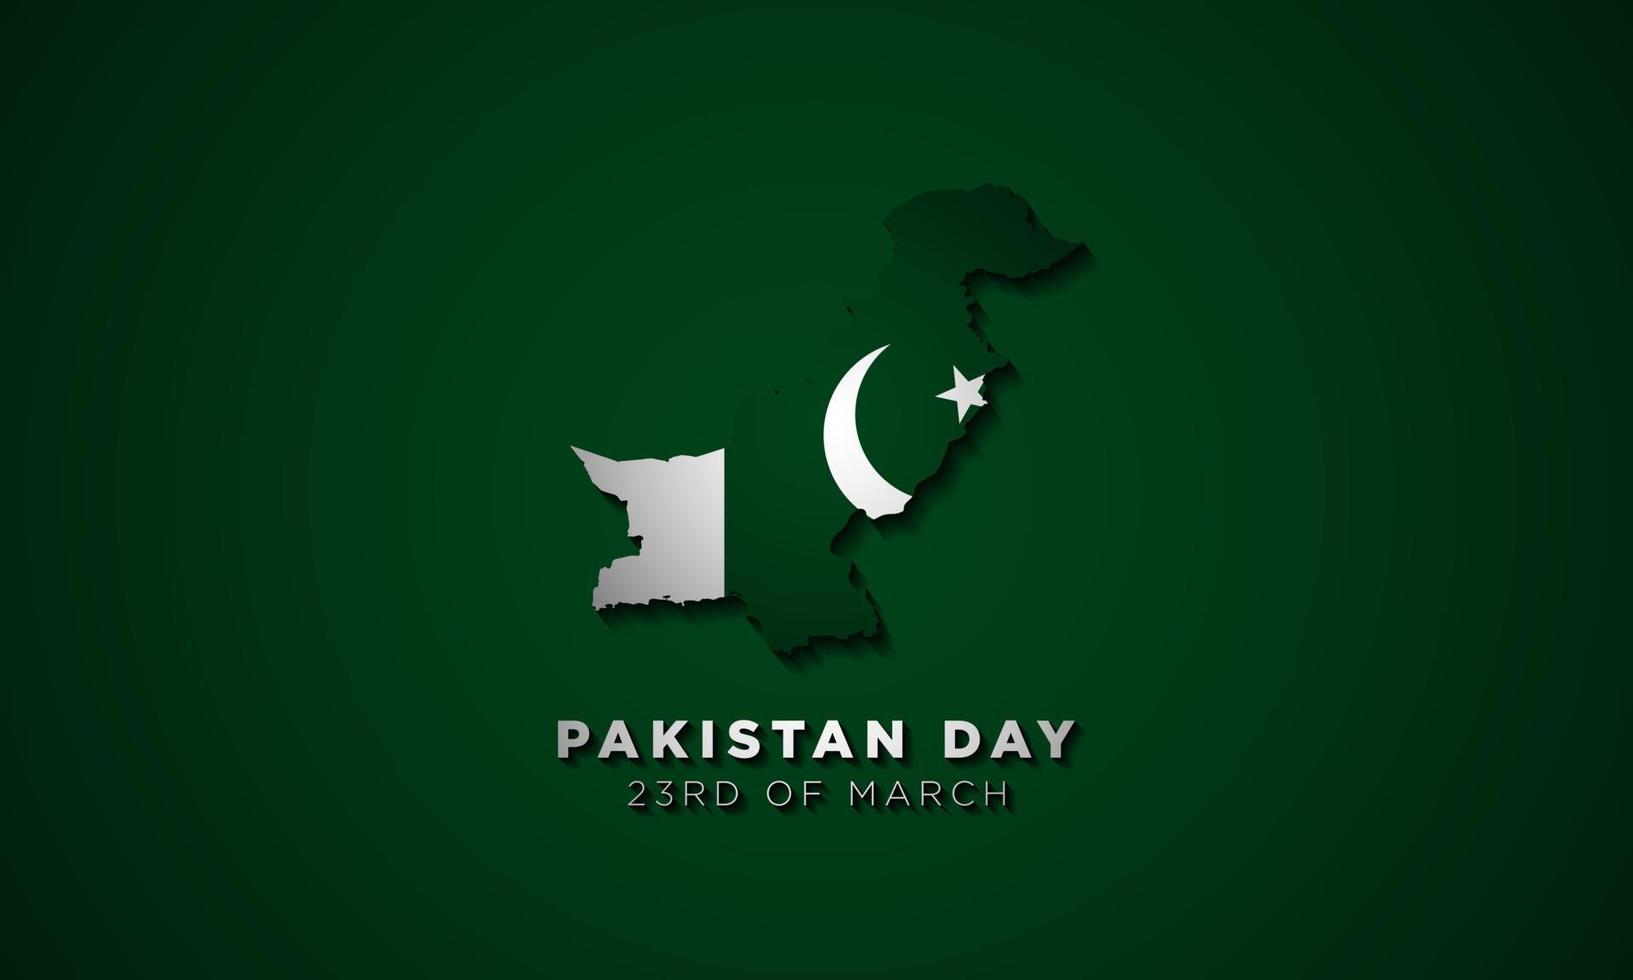 Pakistan Day Background Design. 23rd of March. Vector Illustration.